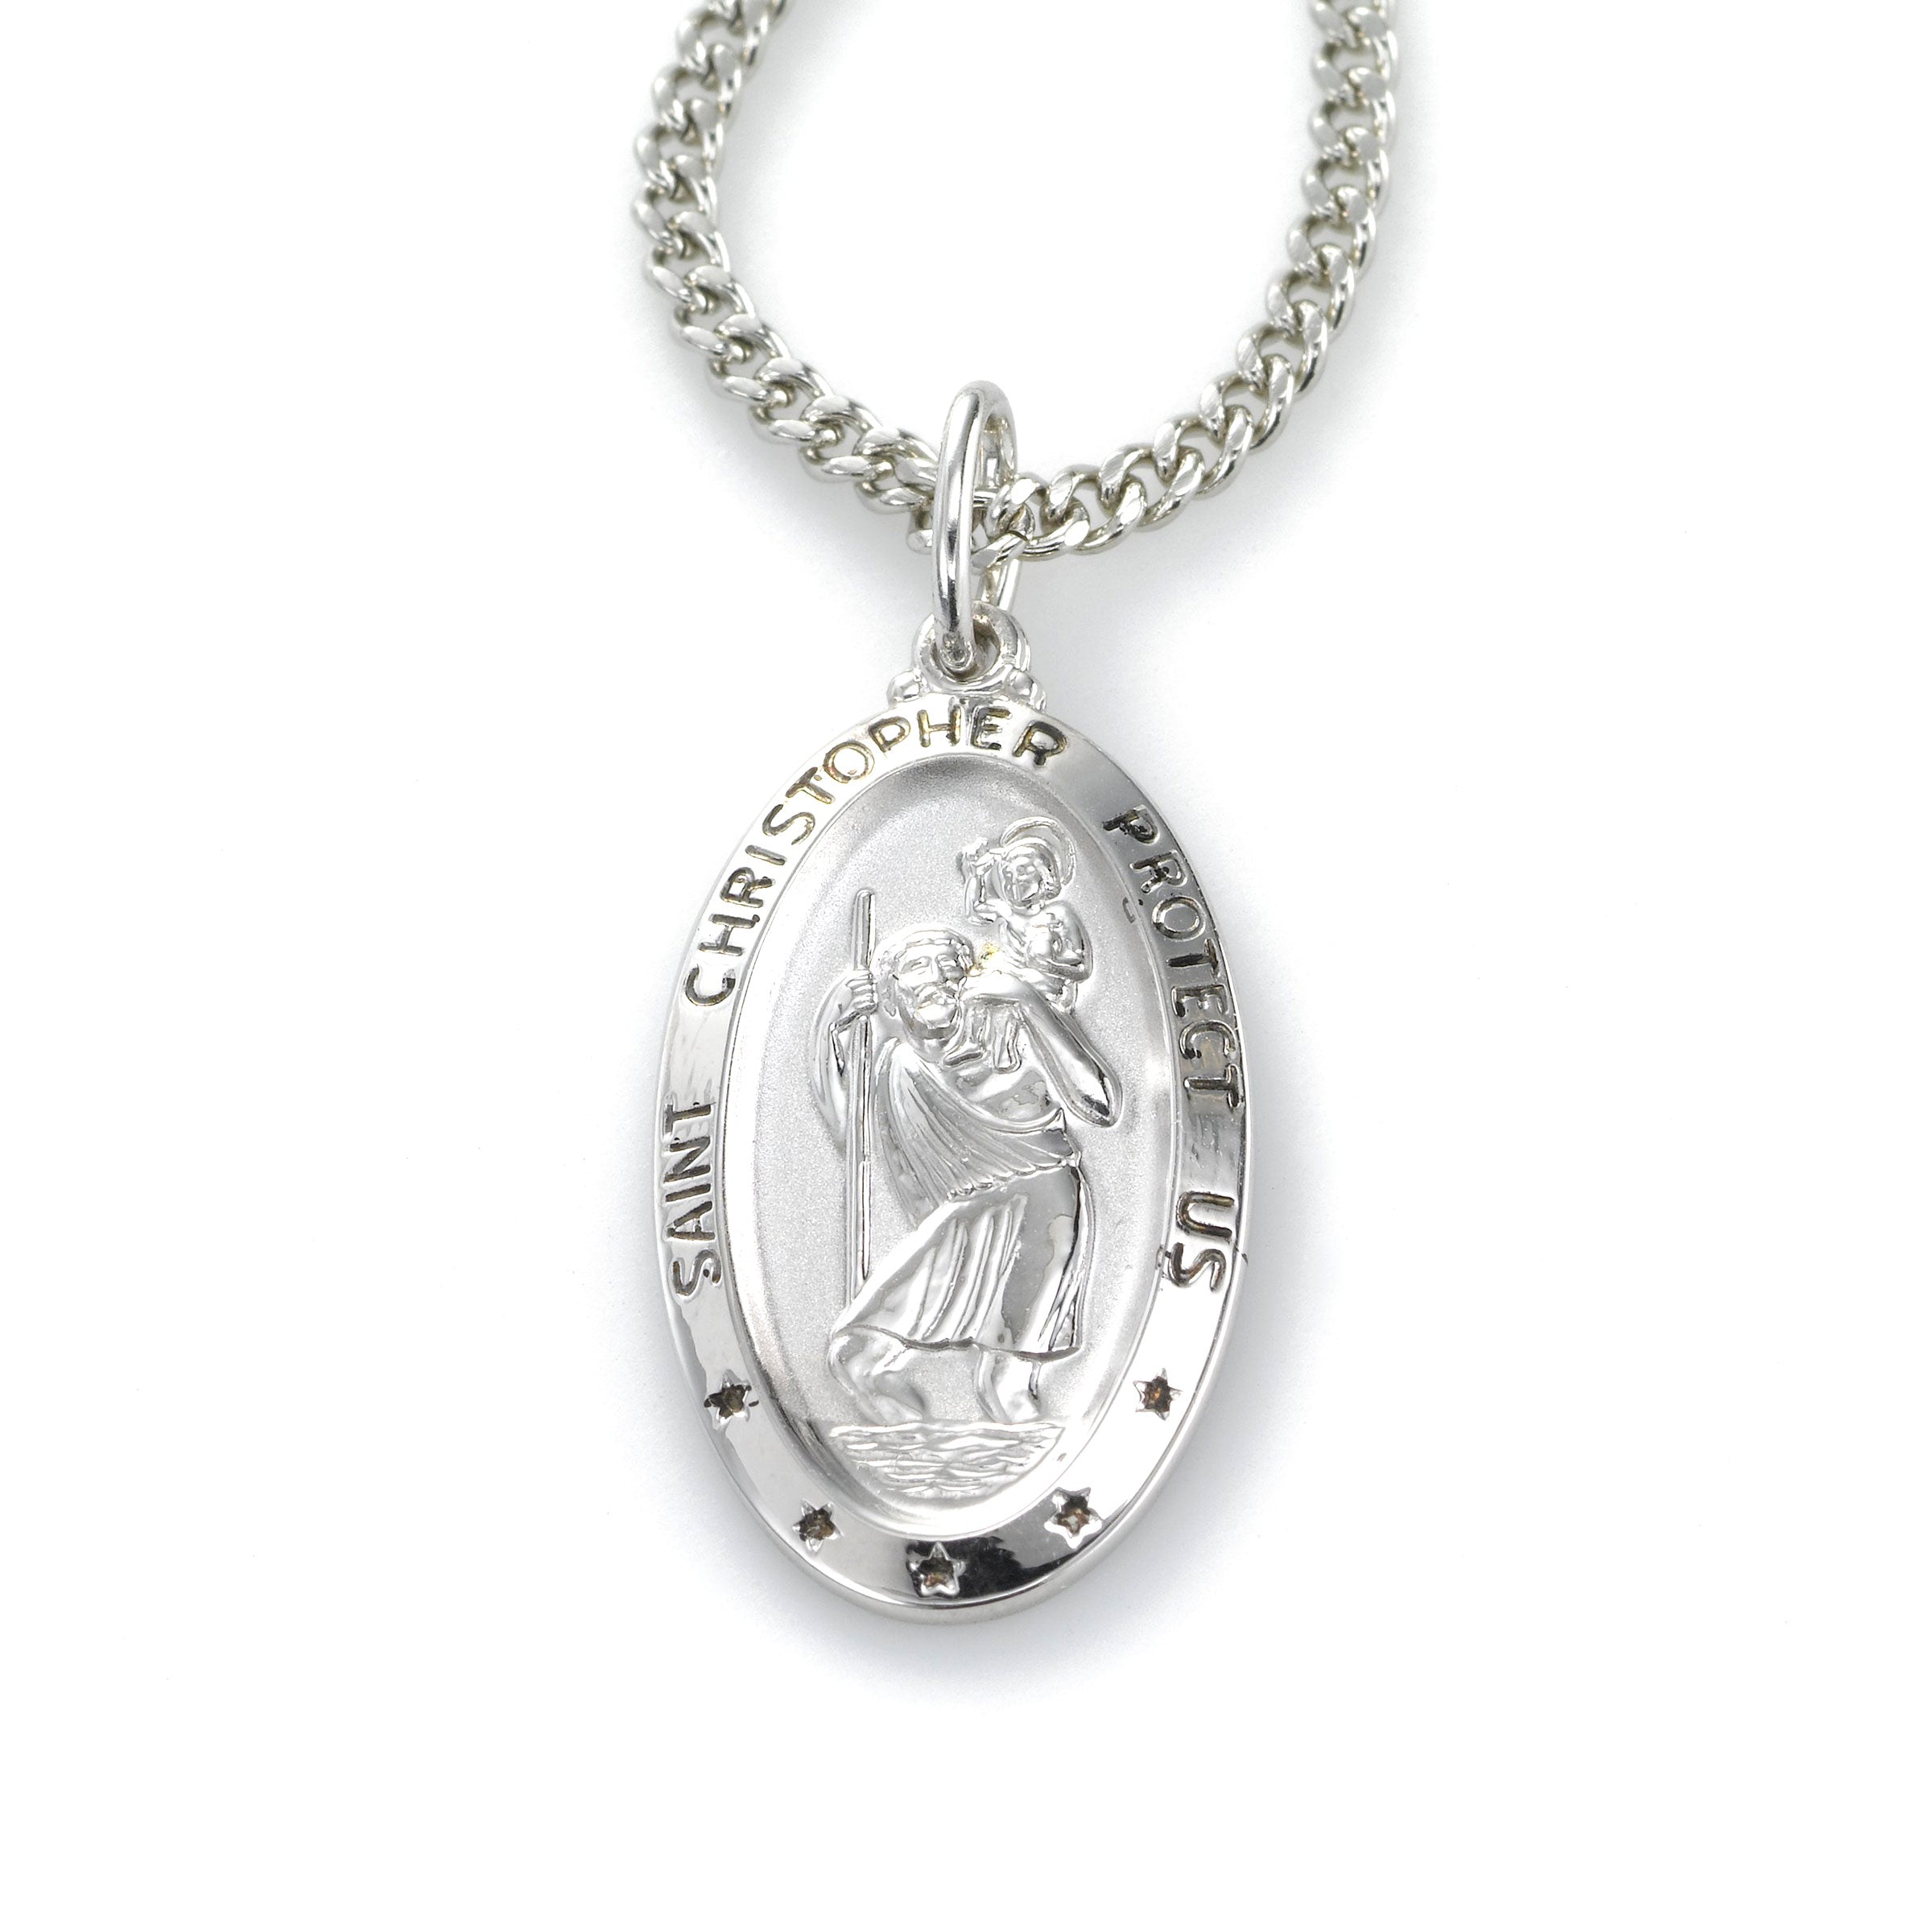 Mens Large Silver Steel St Christopher Necklace, Personalised Protection  Gift | eBay